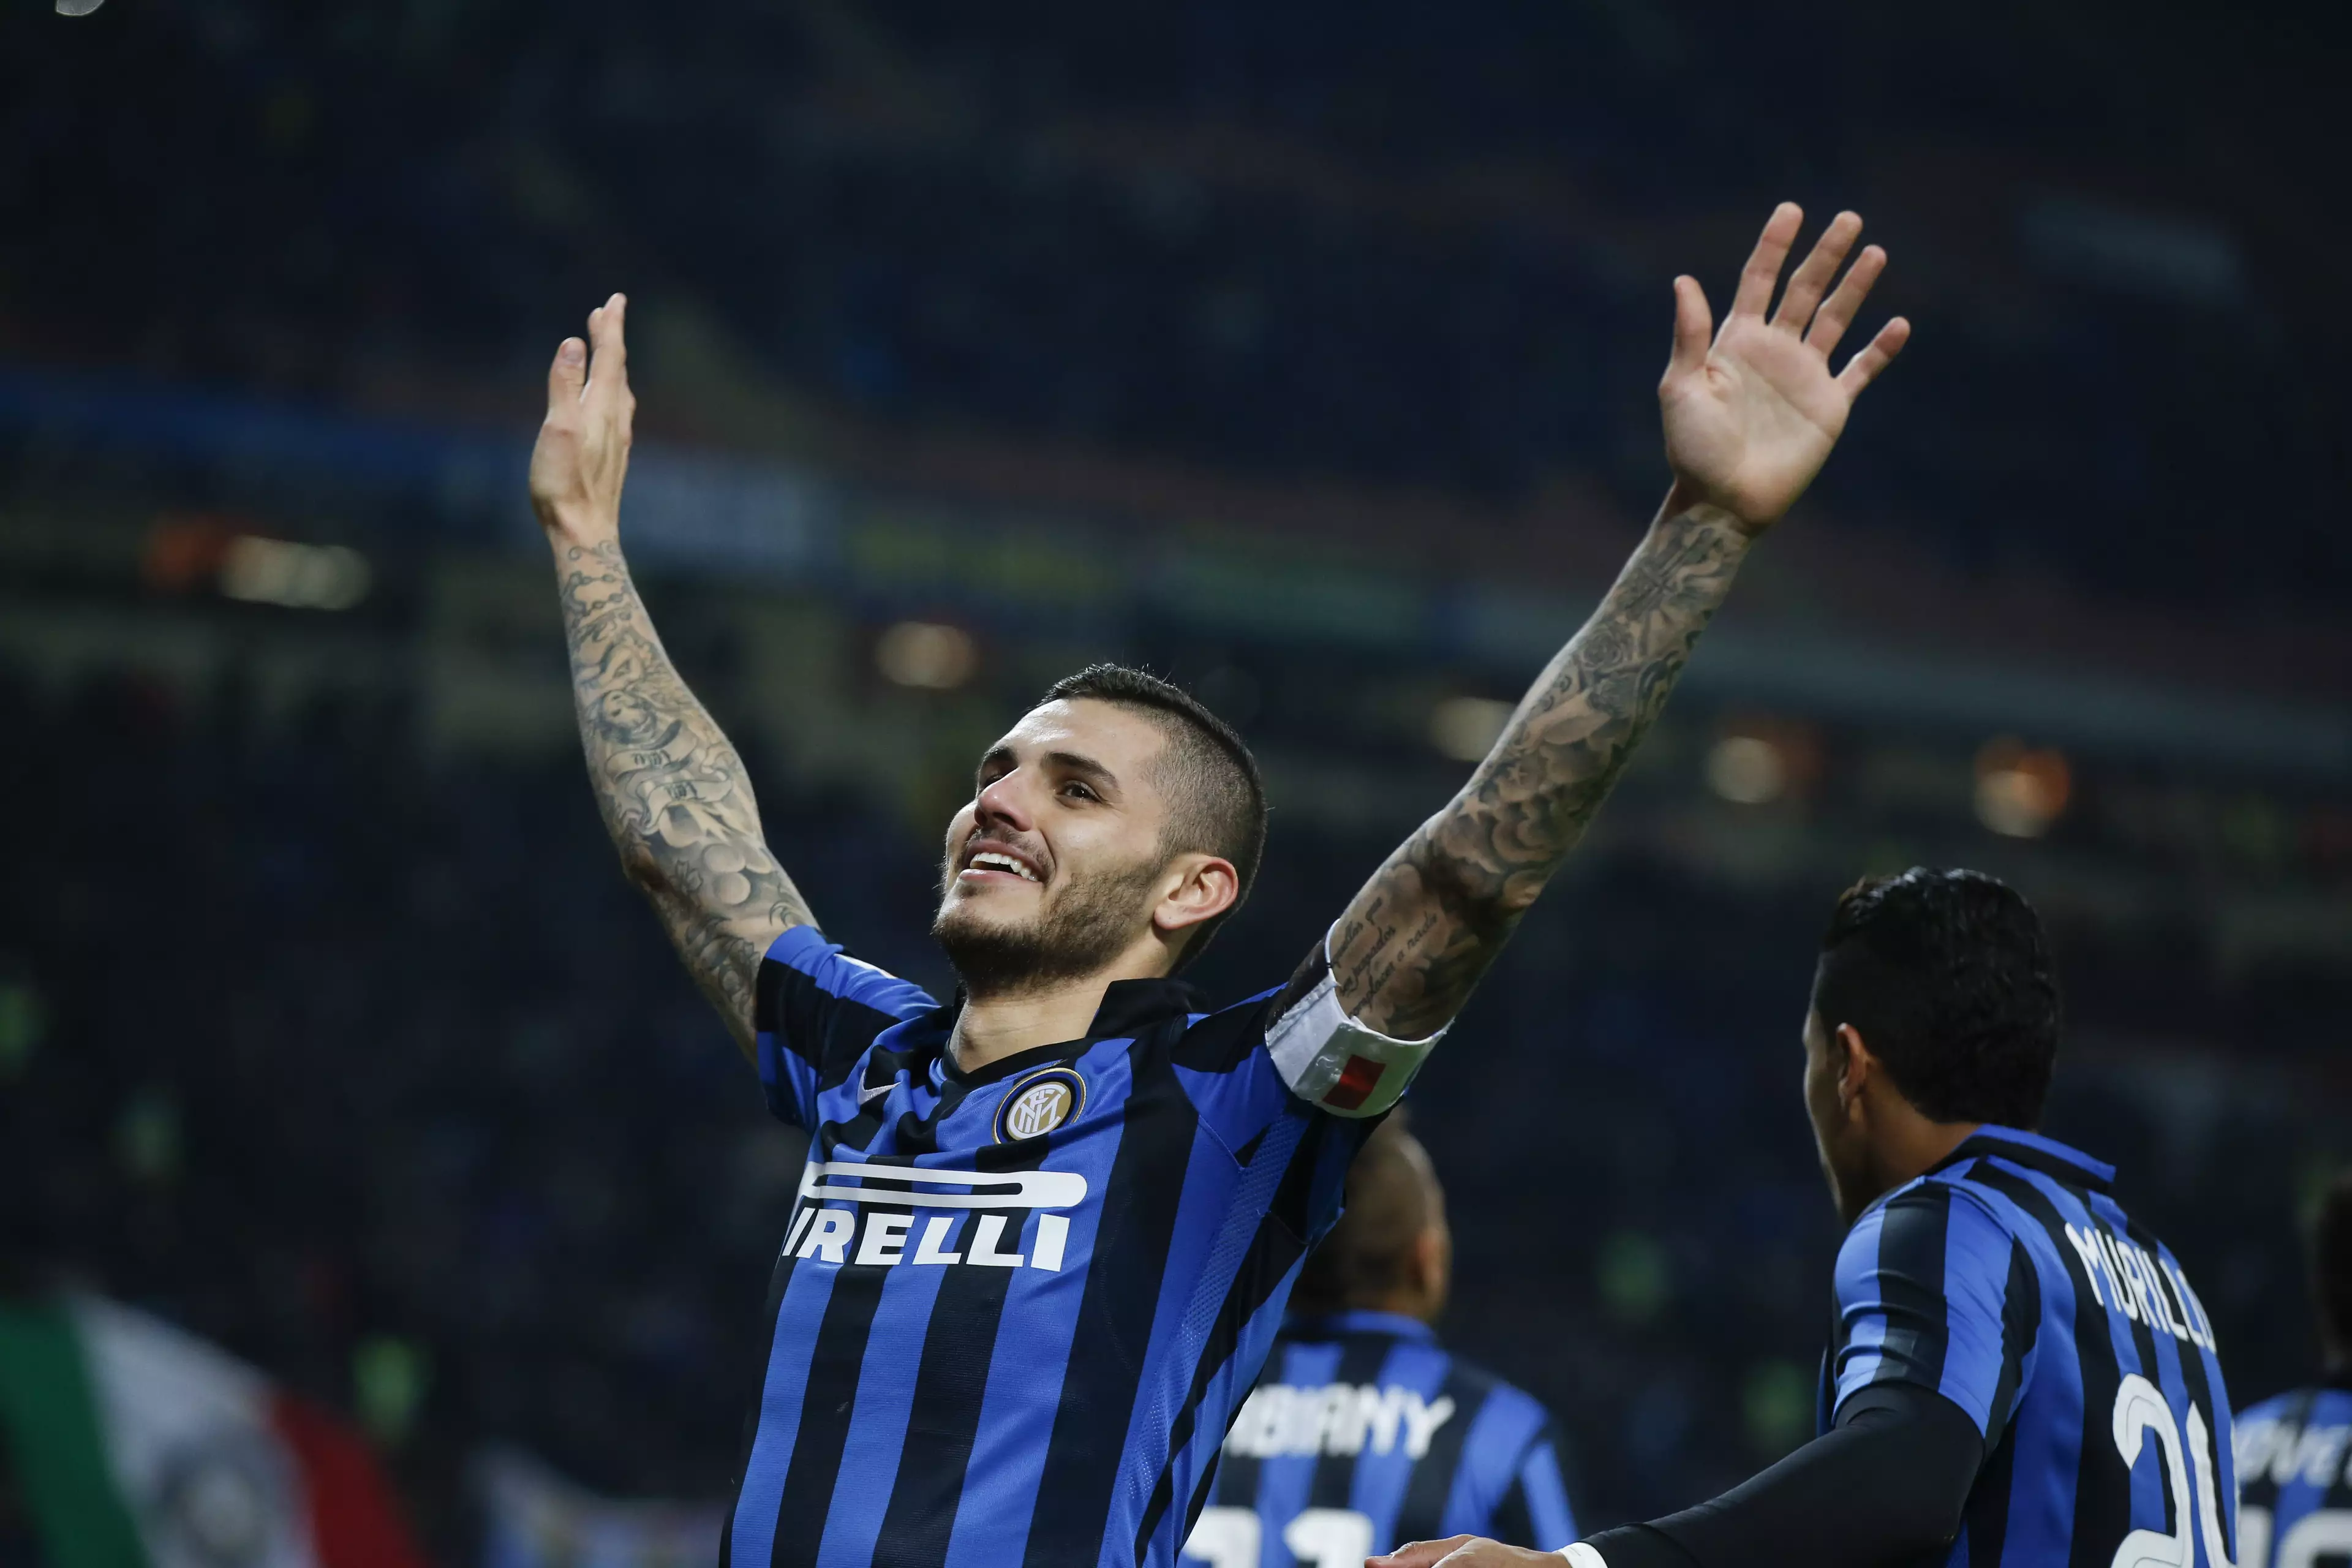 Icardi has more goals in less games in Serie A than Higuain this season. Image: PA Images